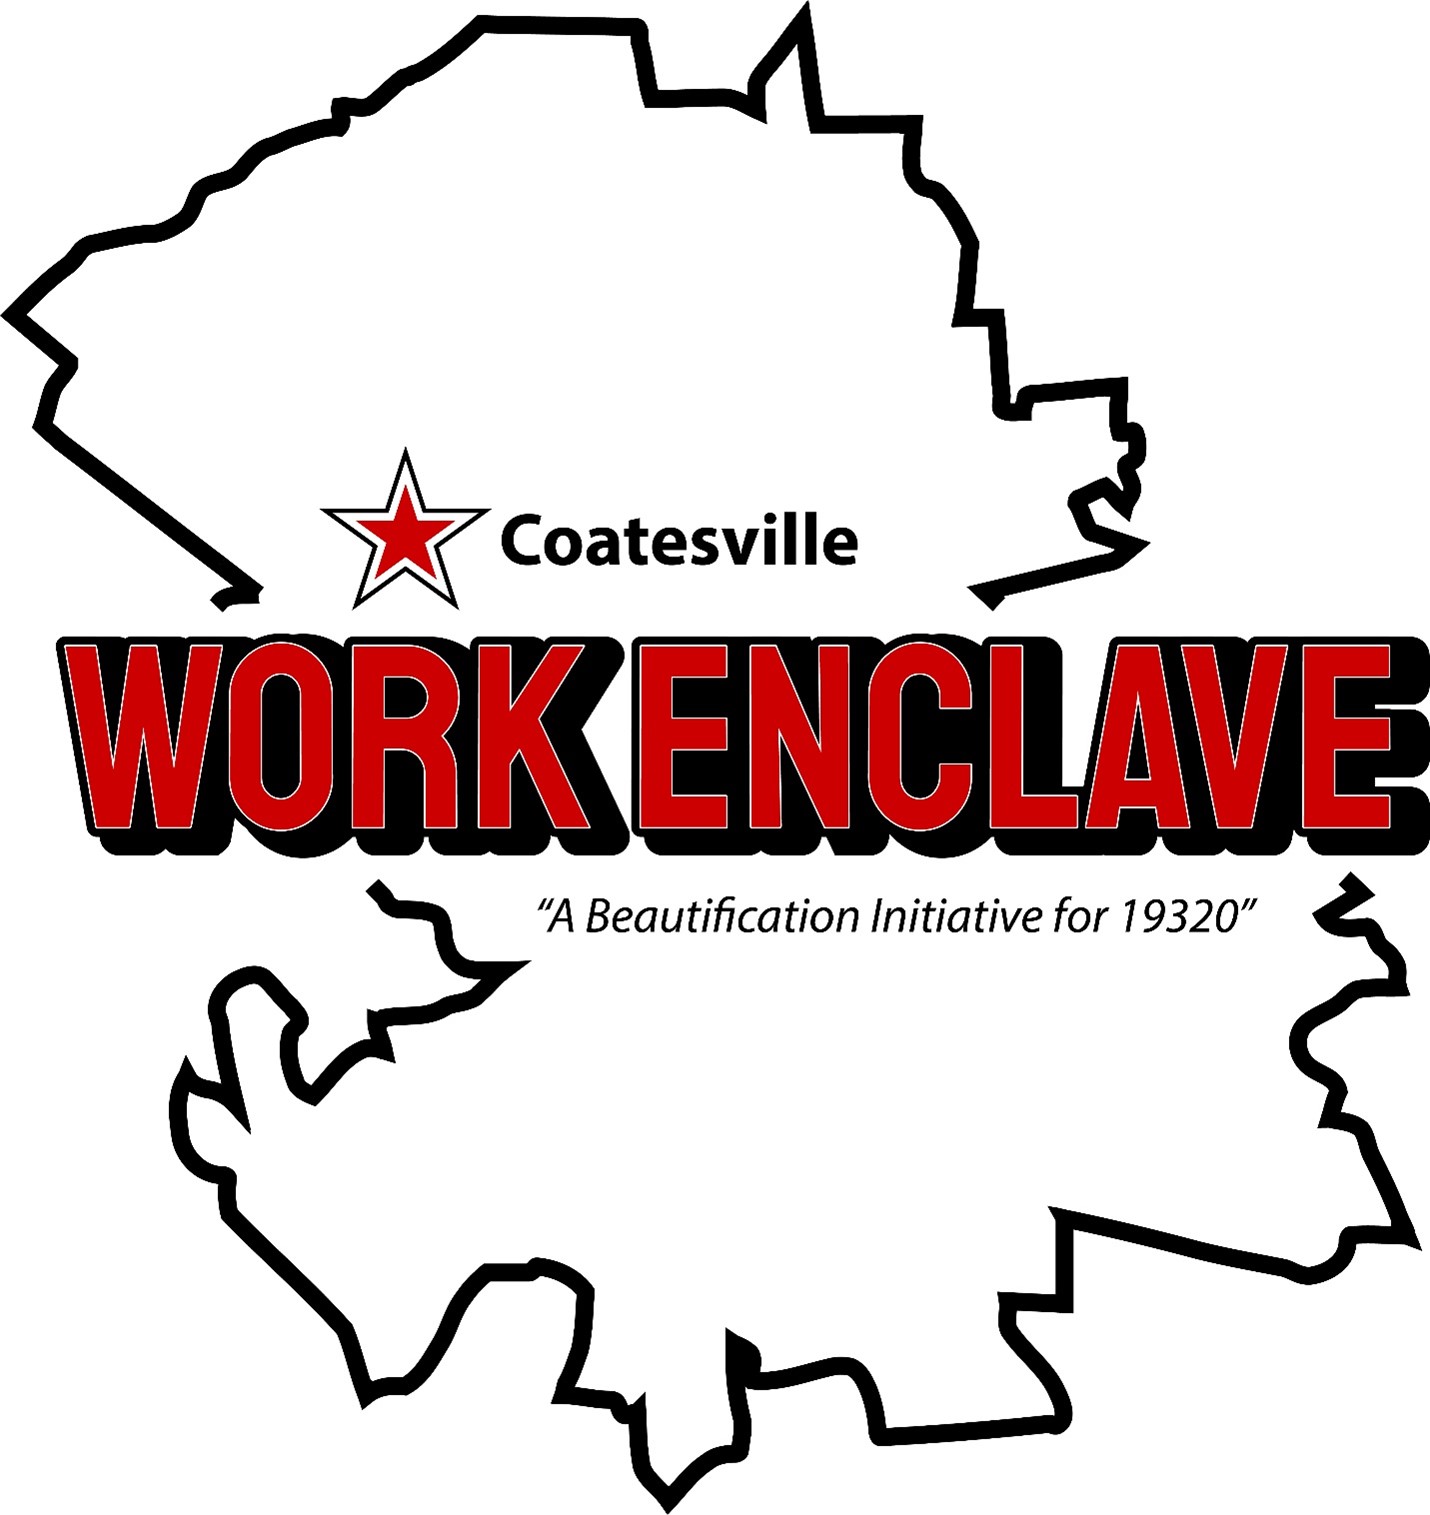 Work Enclave Program: A Beautification Initiative for 19320.